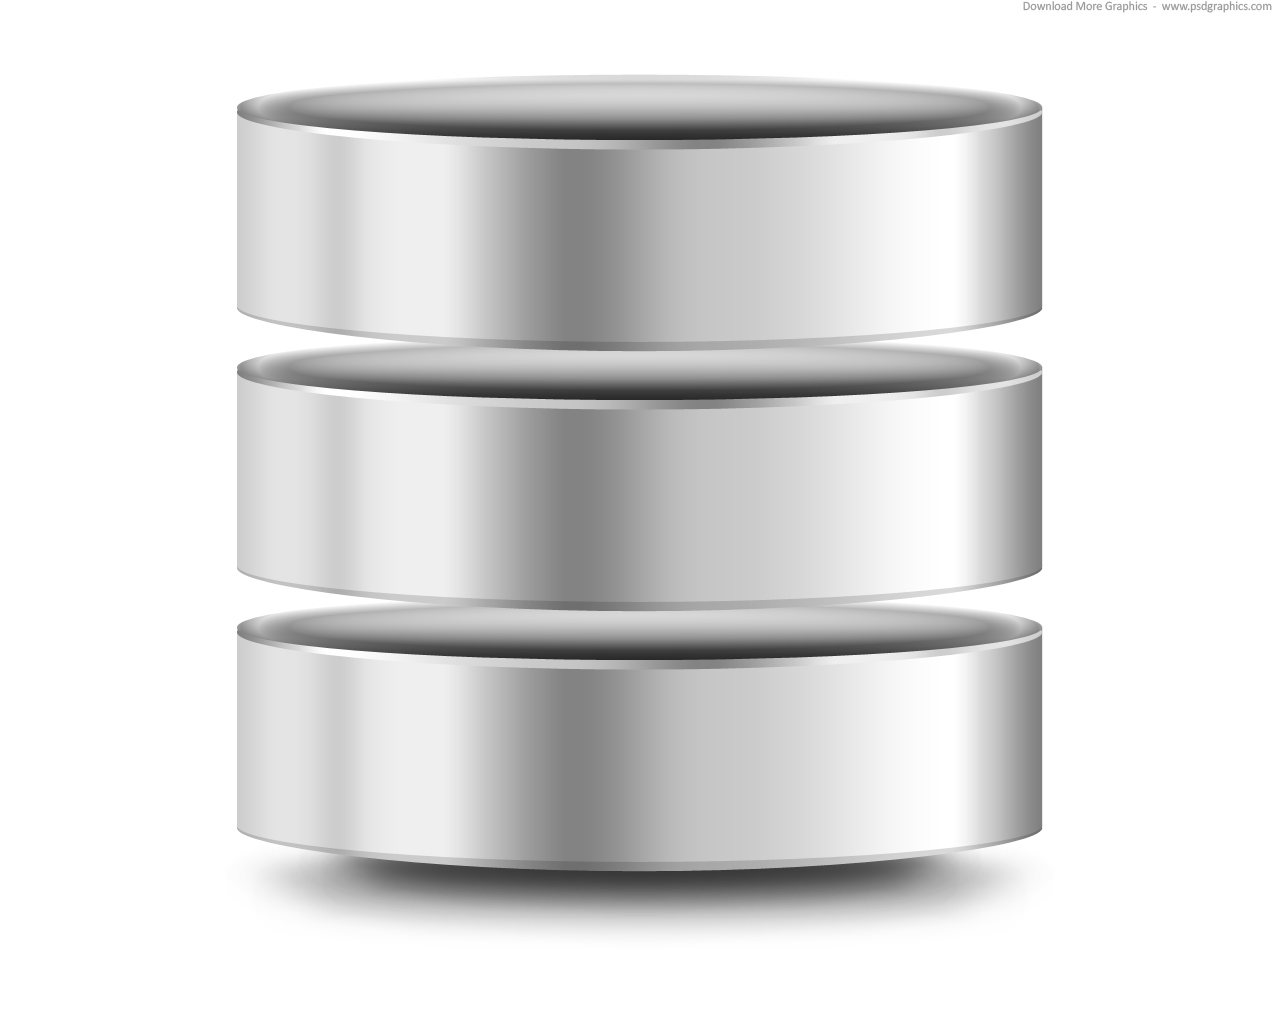 Silver Computer Database Icon  Psd    Psdgraphics